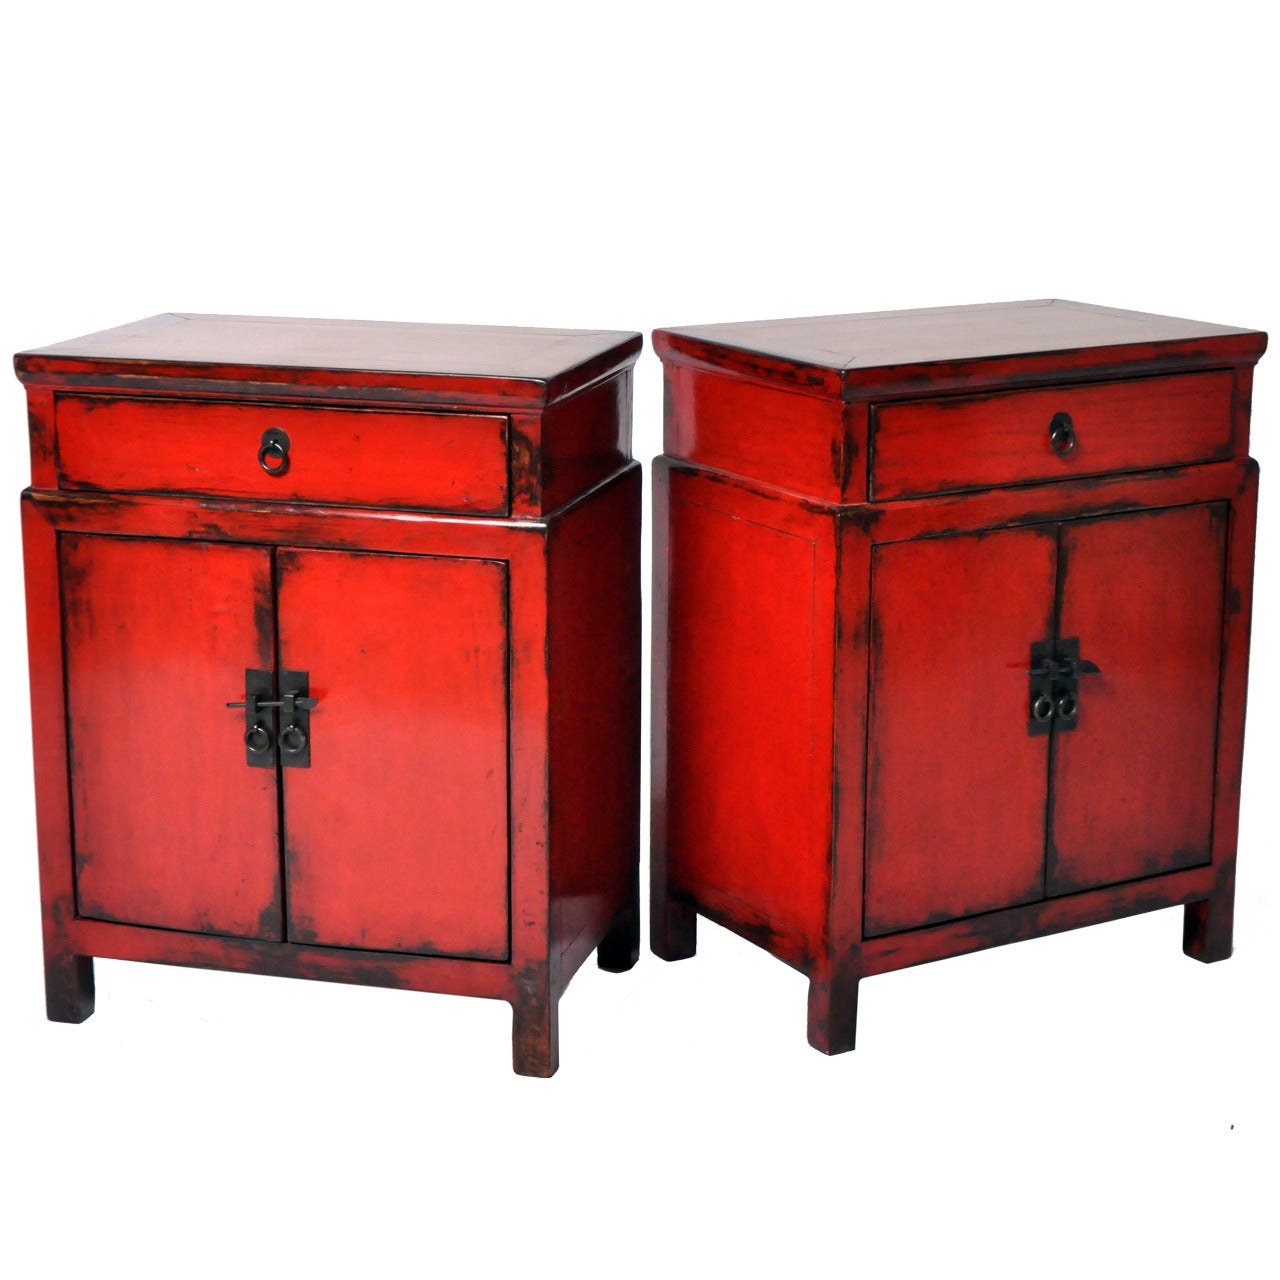 Pair of Red Lacquered Bedside Chests